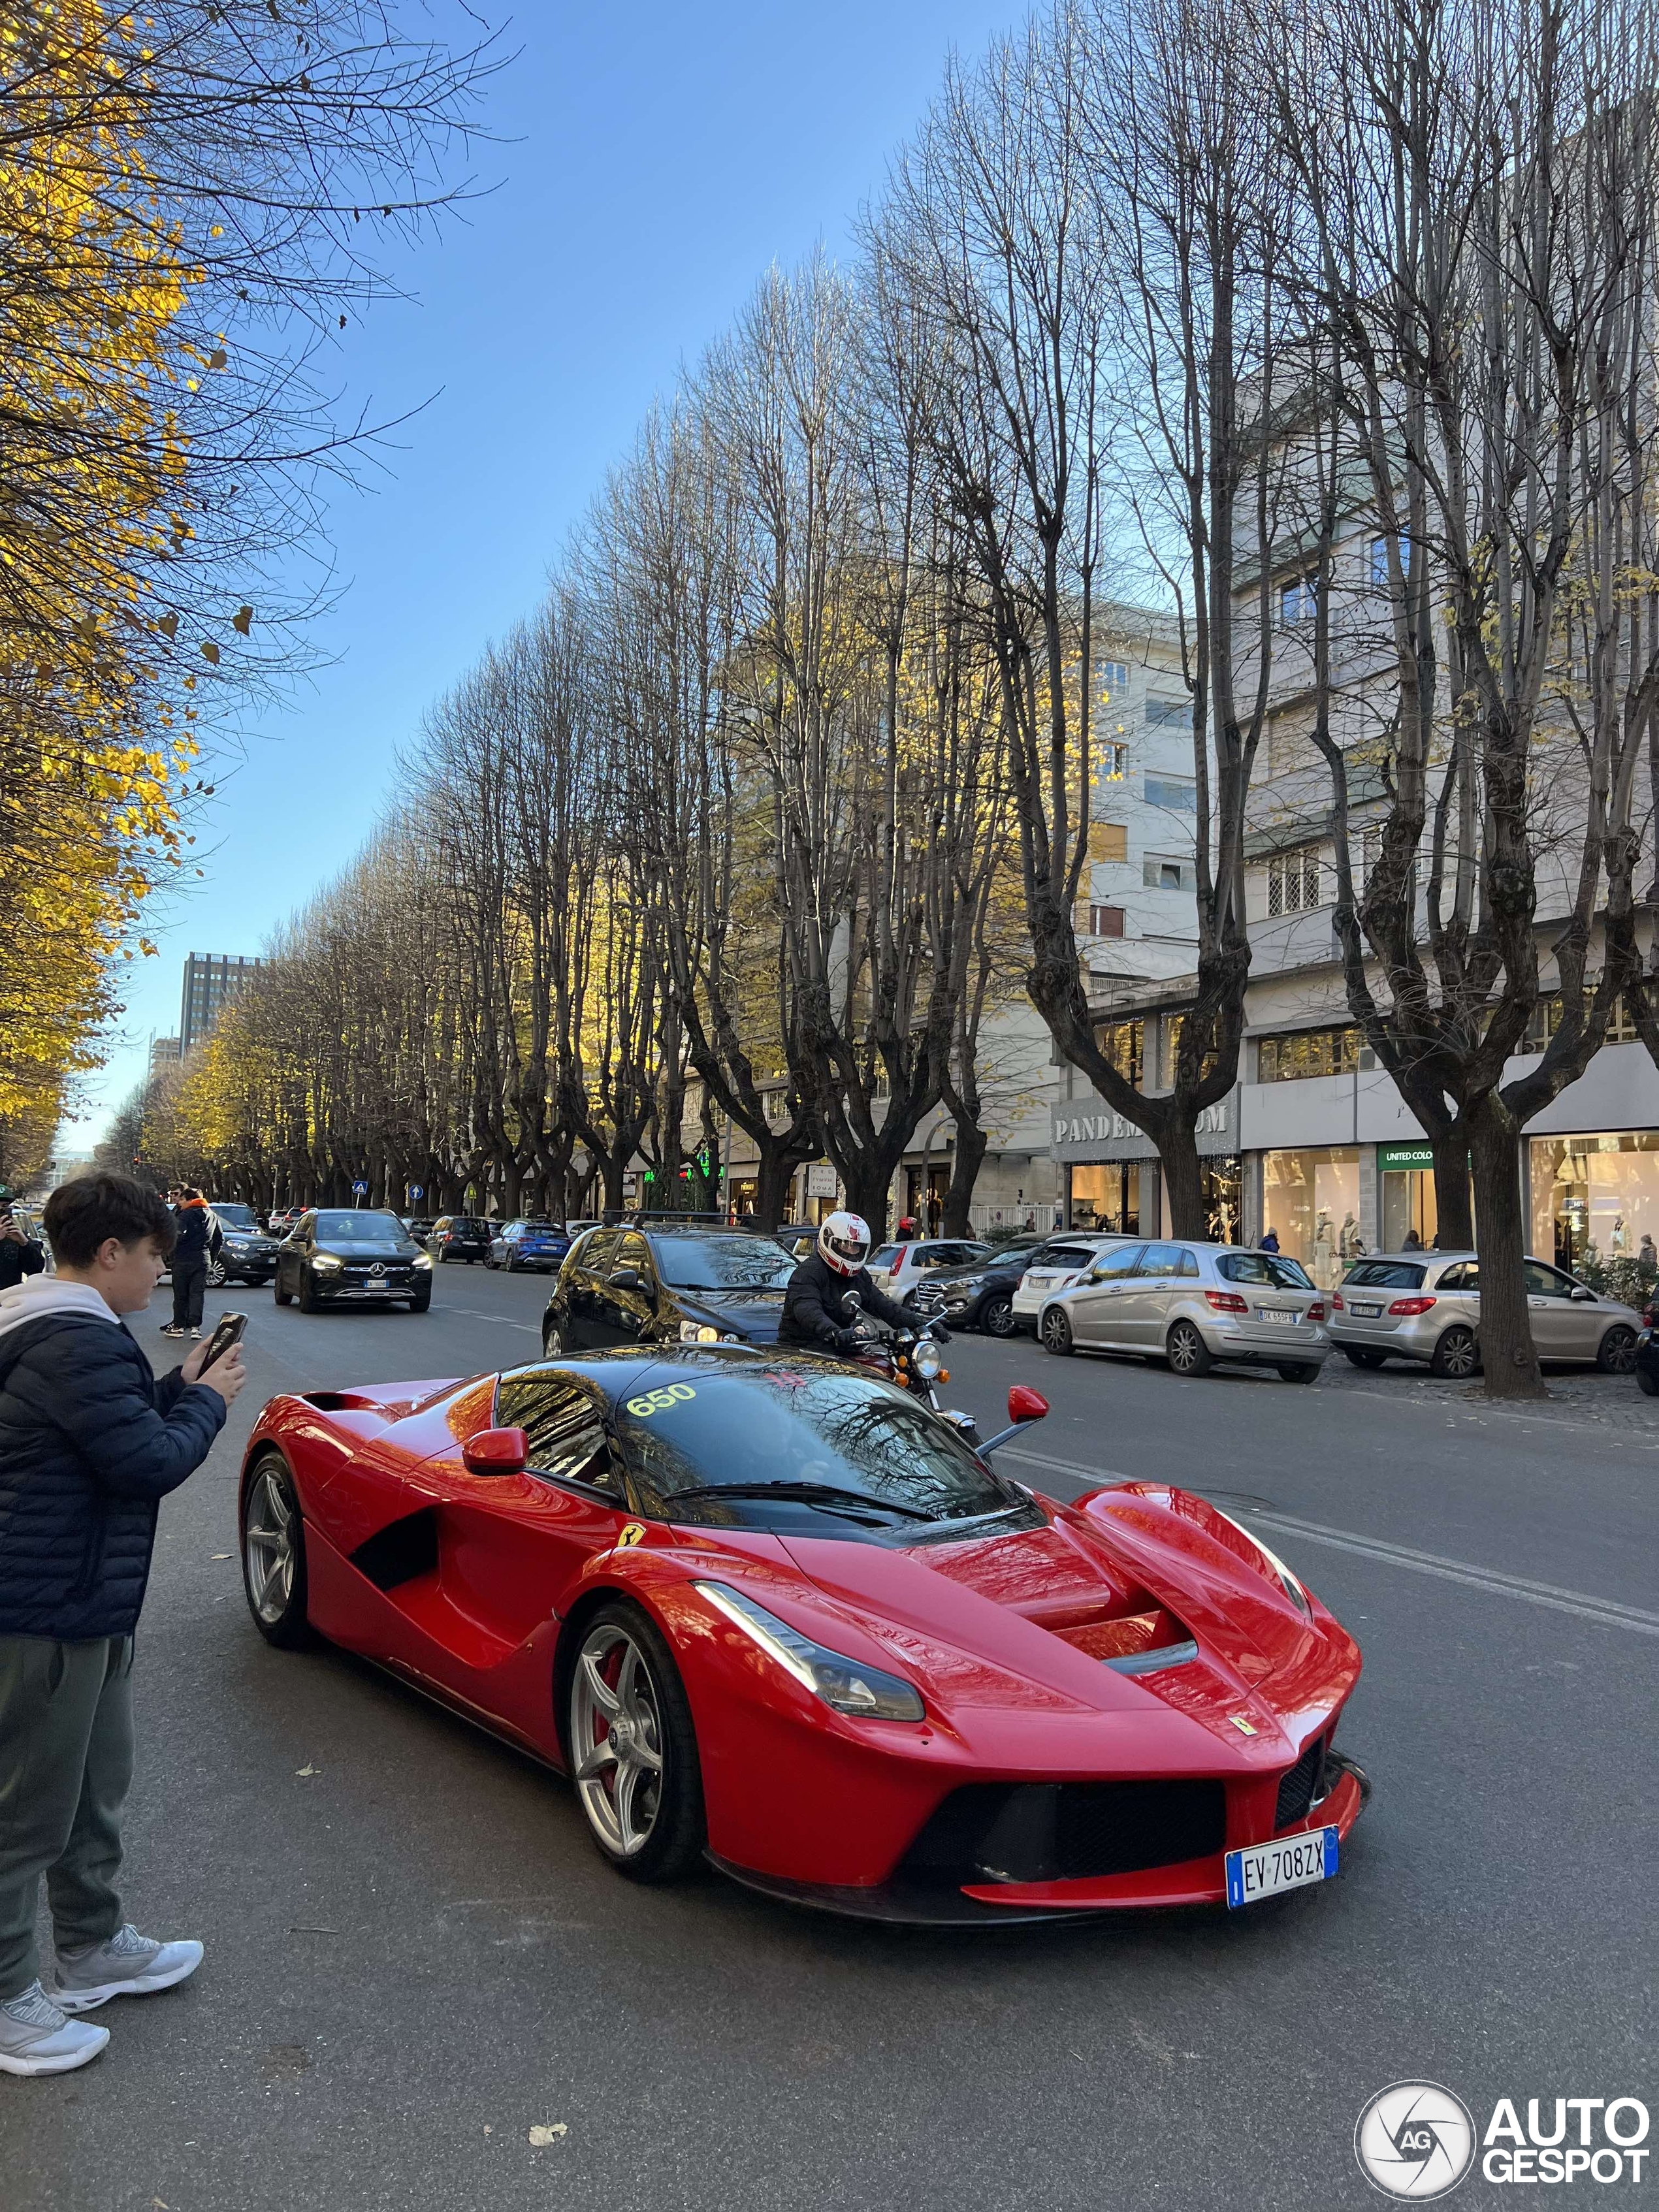 This is the very first Ferrari LaFerrari in Rome.